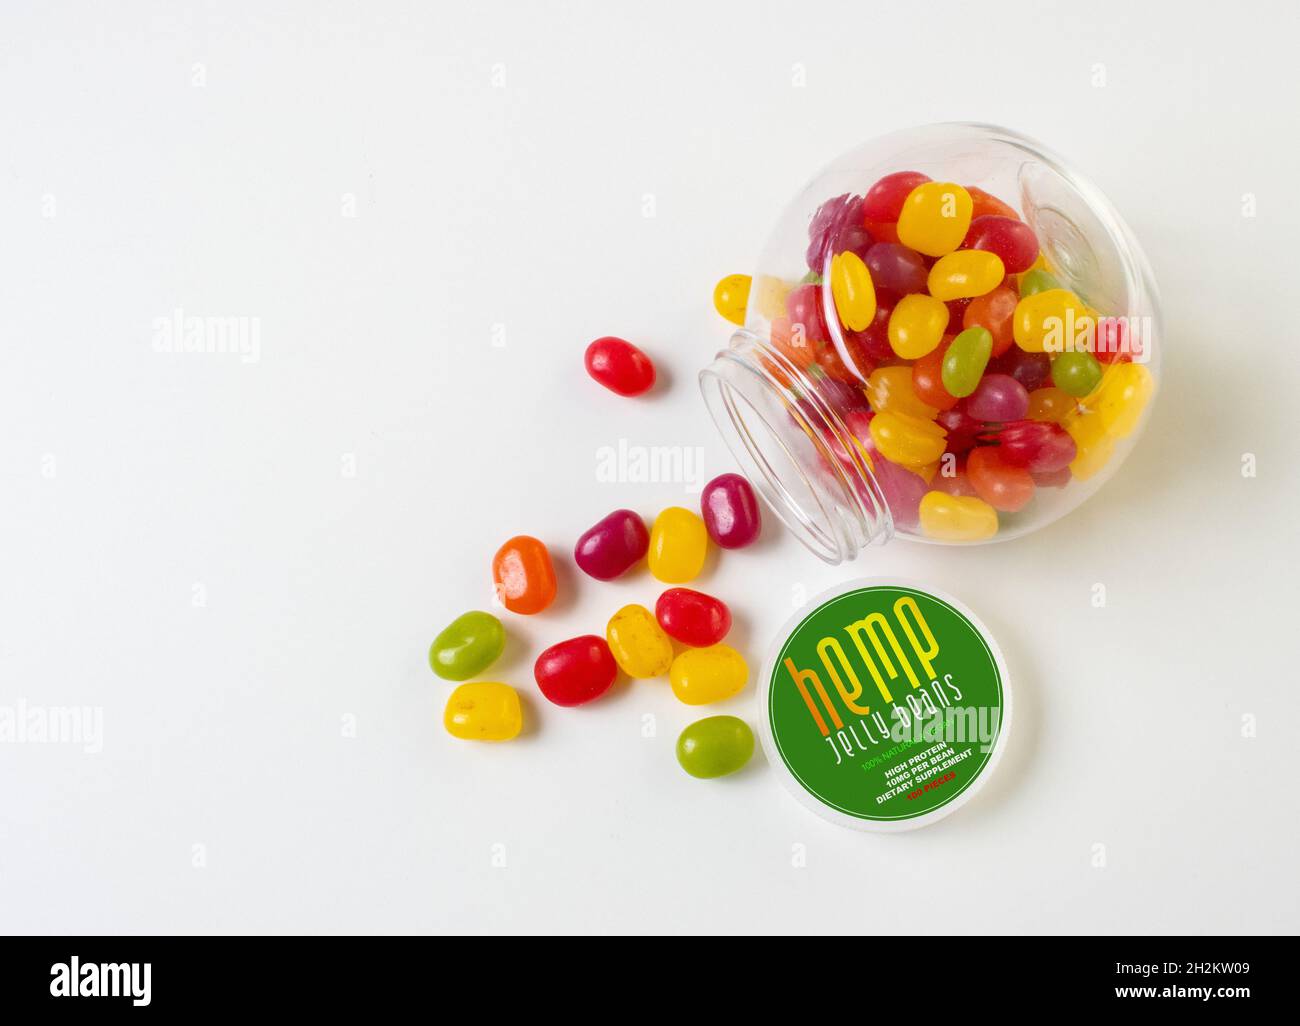 Cannabis infused jelly beans, conceptual image Stock Photo